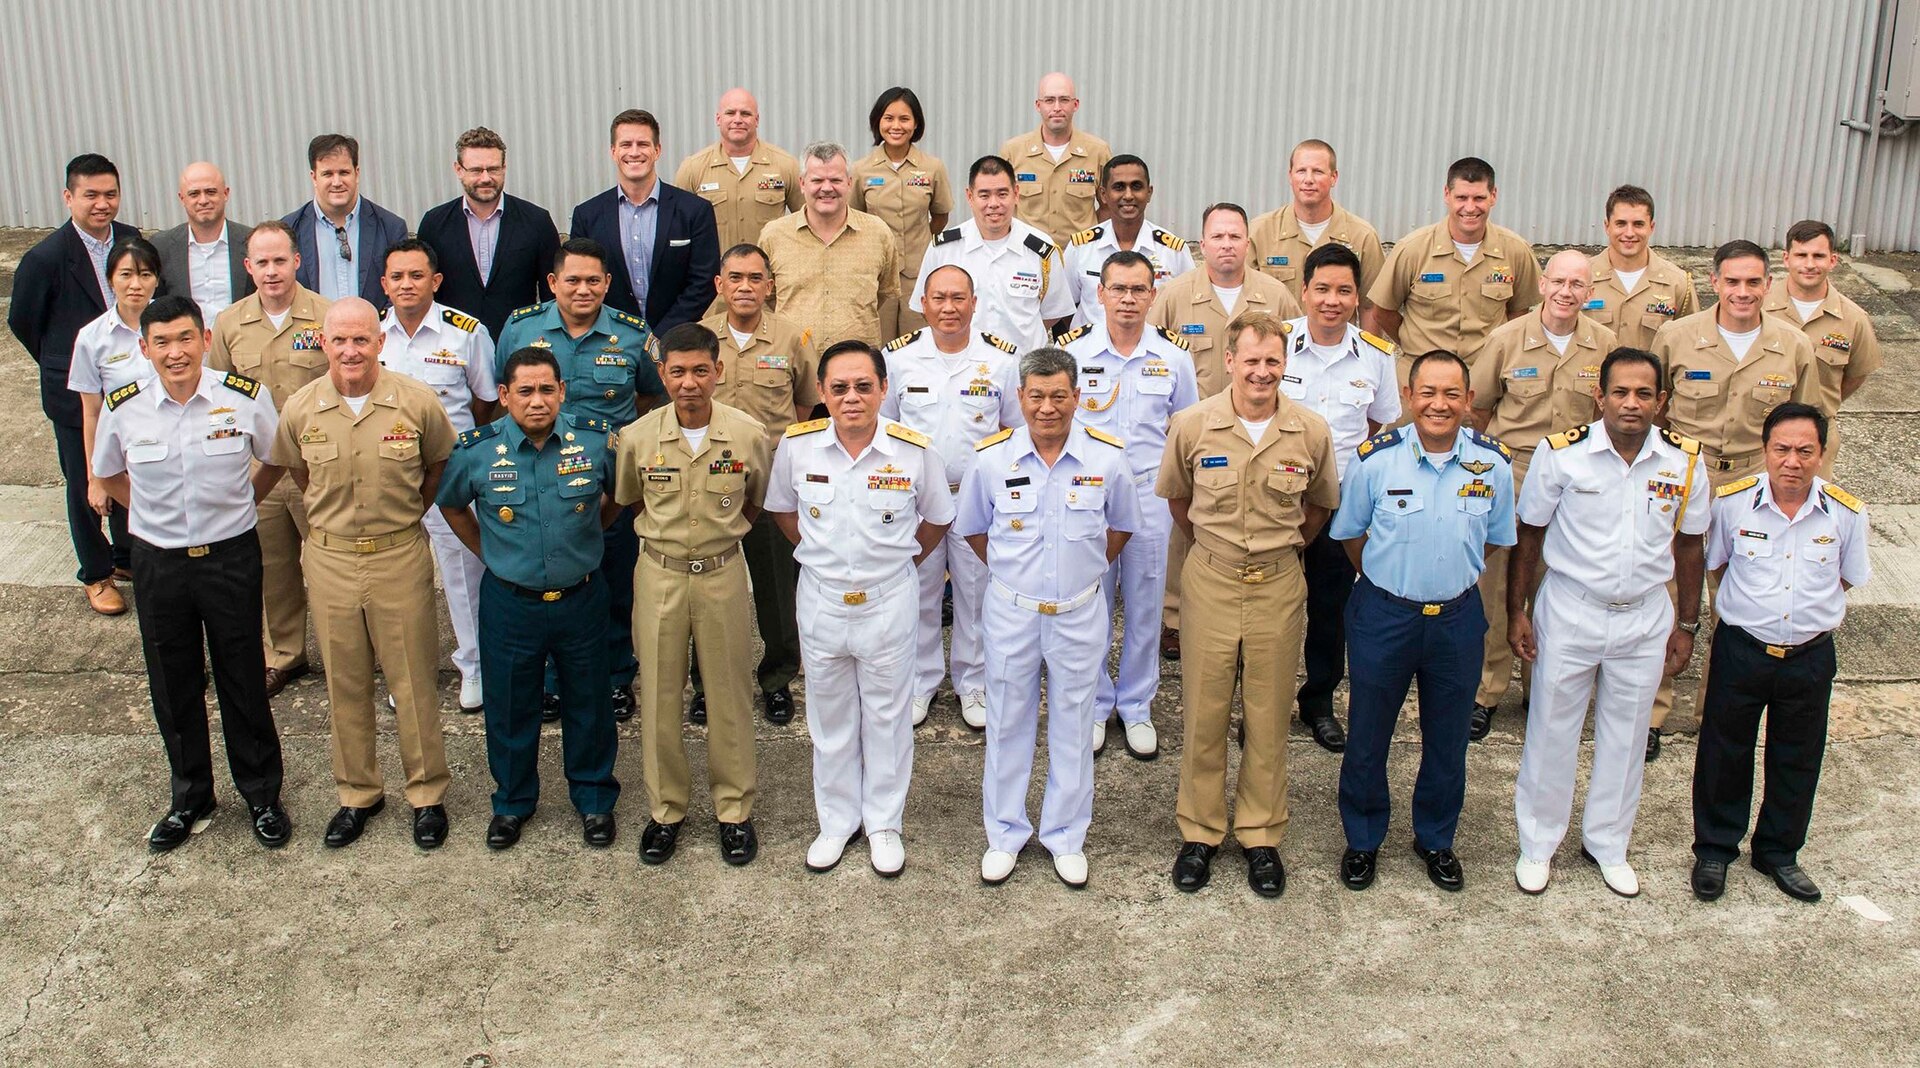 Regional naval leaders gather in Singapore to enhance security partnerships